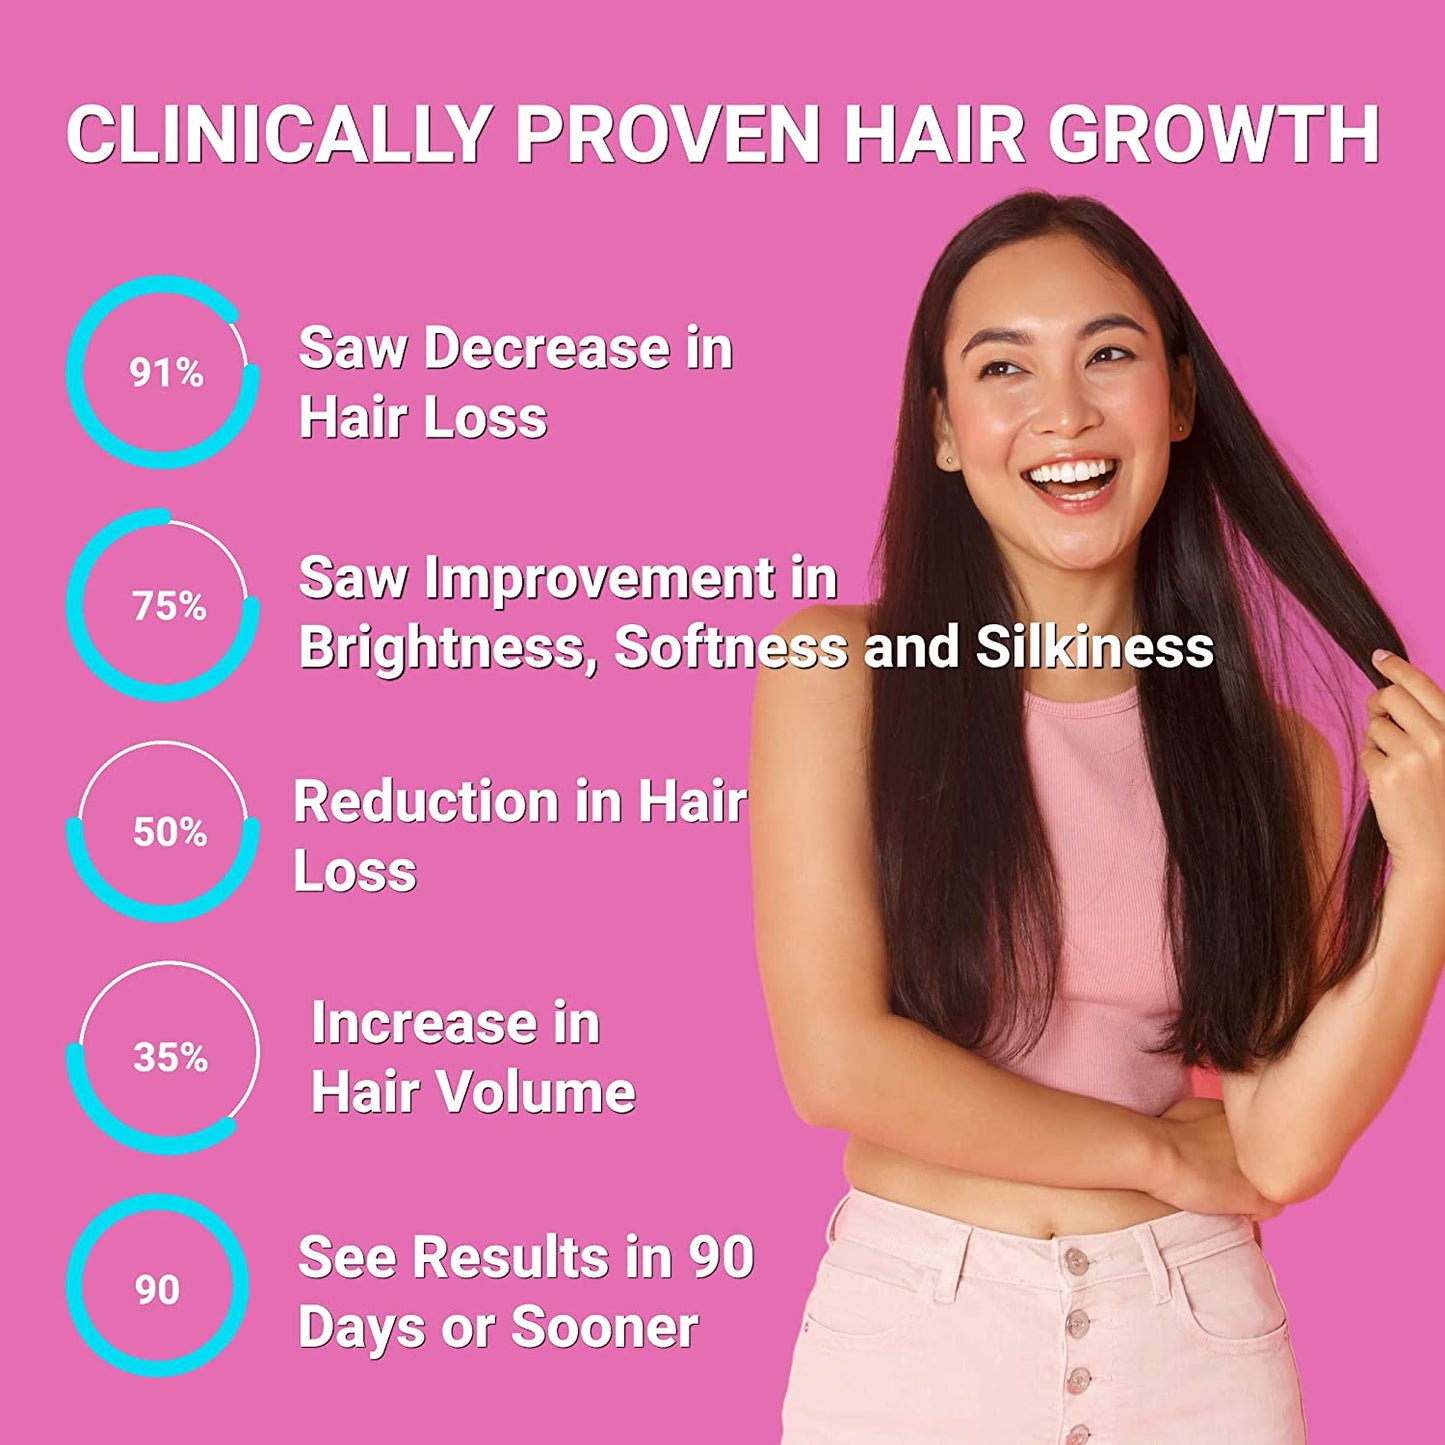 New Hair Growth Vitamins for Women - Proven Hair Supplement with KERANAT, DHT Blocker PHYTOPIN, Biotin 5000 mcg & SOD, - Hair Vitamins for Faster Hair Growth, Hair Loss & Thinning Hair - 90 ct